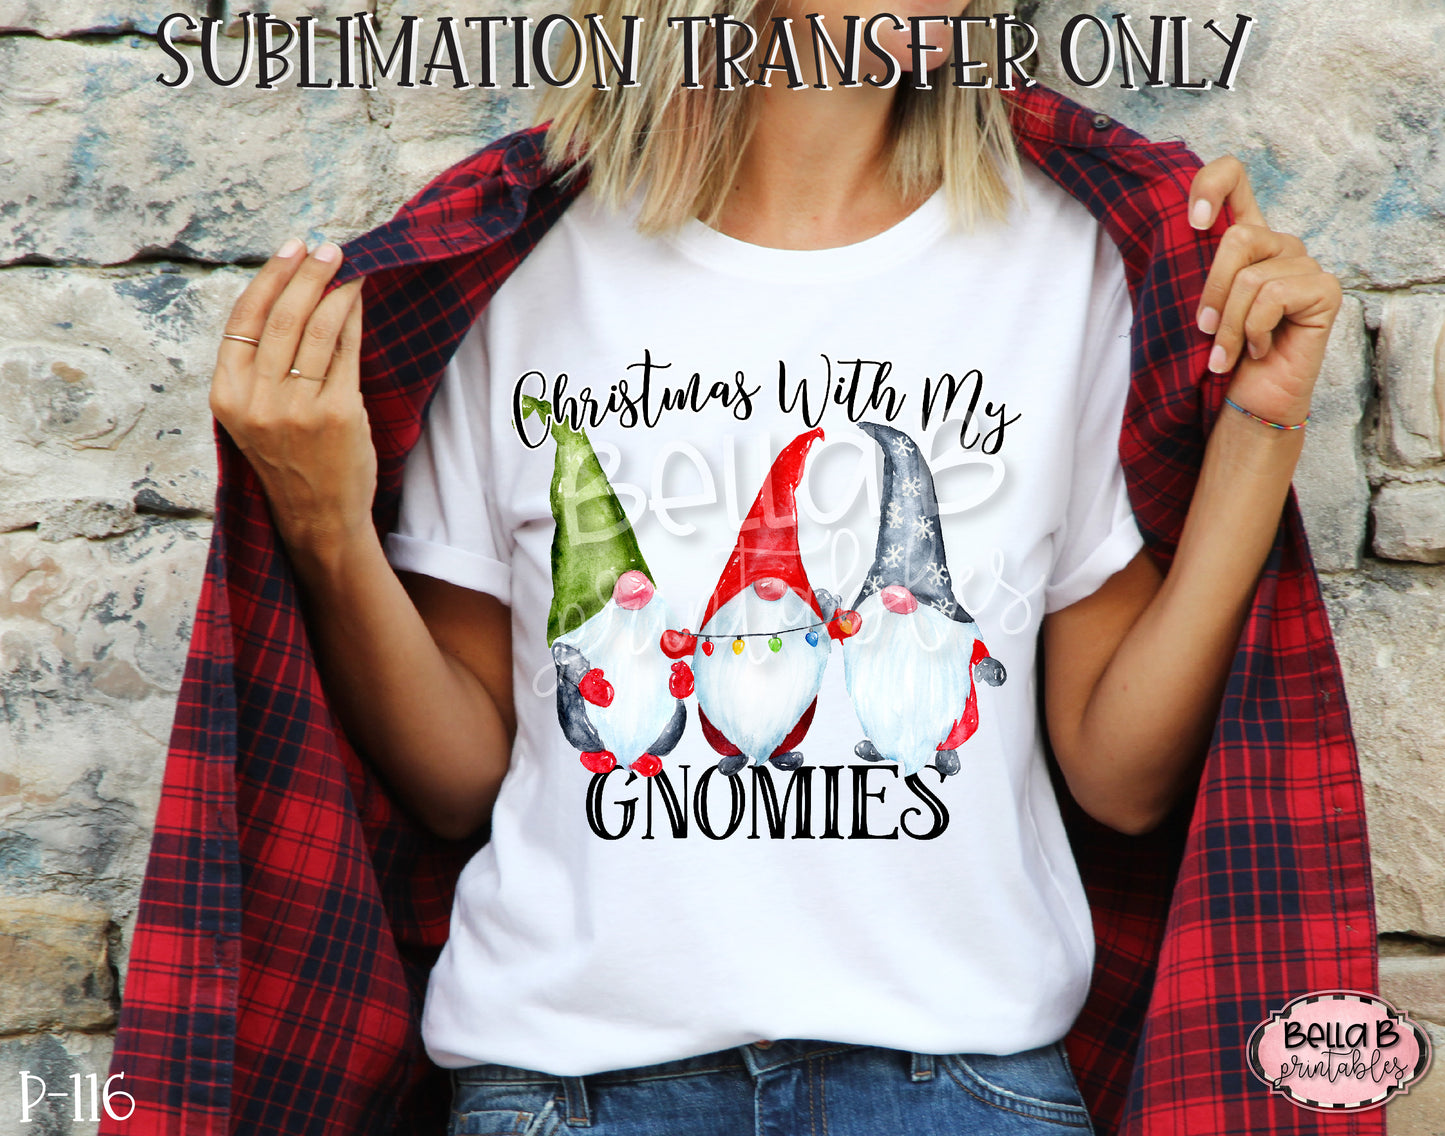 Christmas With My Gnomies Sublimation Transfer, Ready To Press